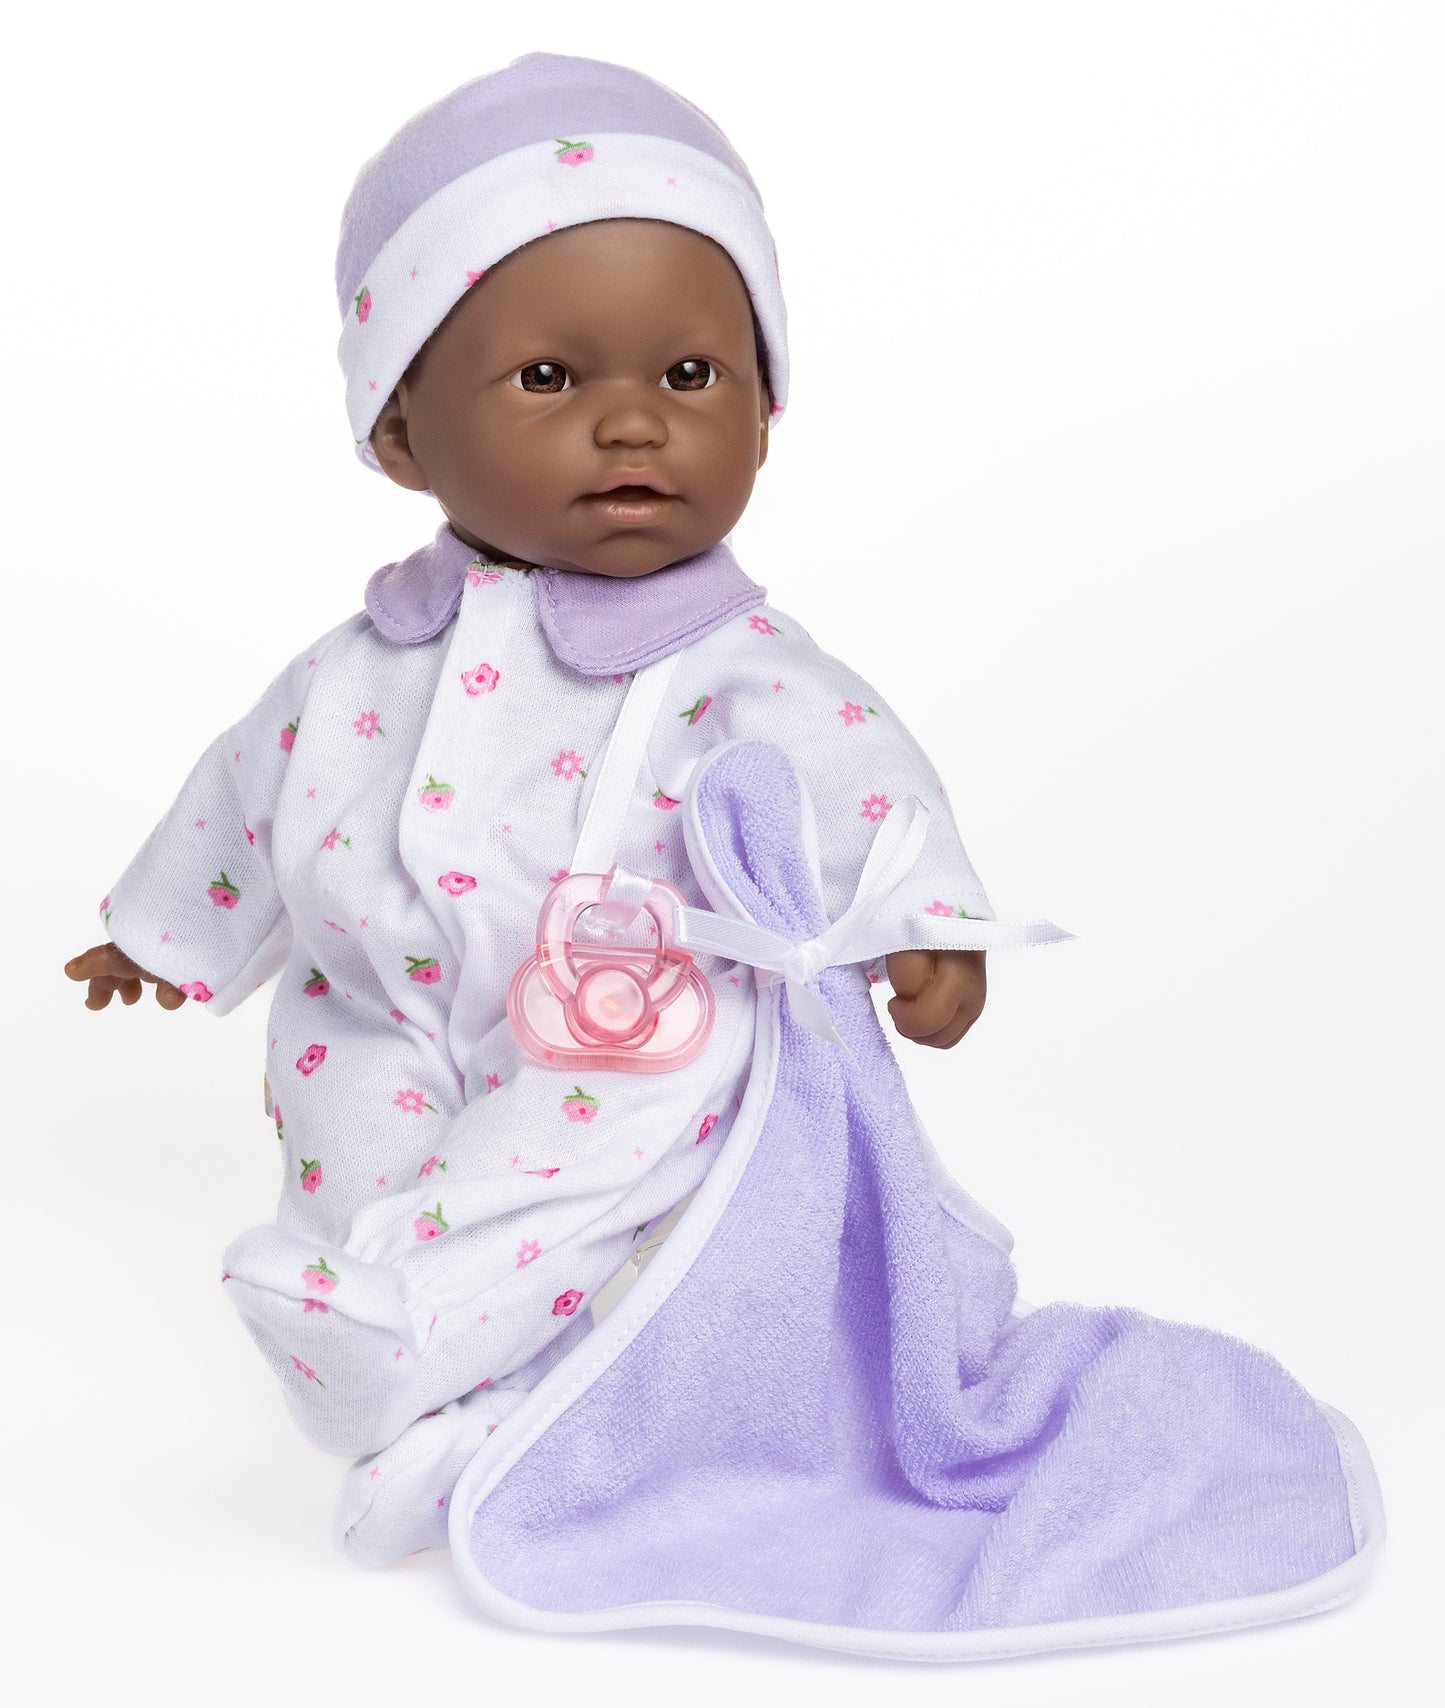 11" Soft Body Doll Dressed in Purple and Flower Print outfit. Doll is wearing a hat, and can use pictured pacifier and blanket